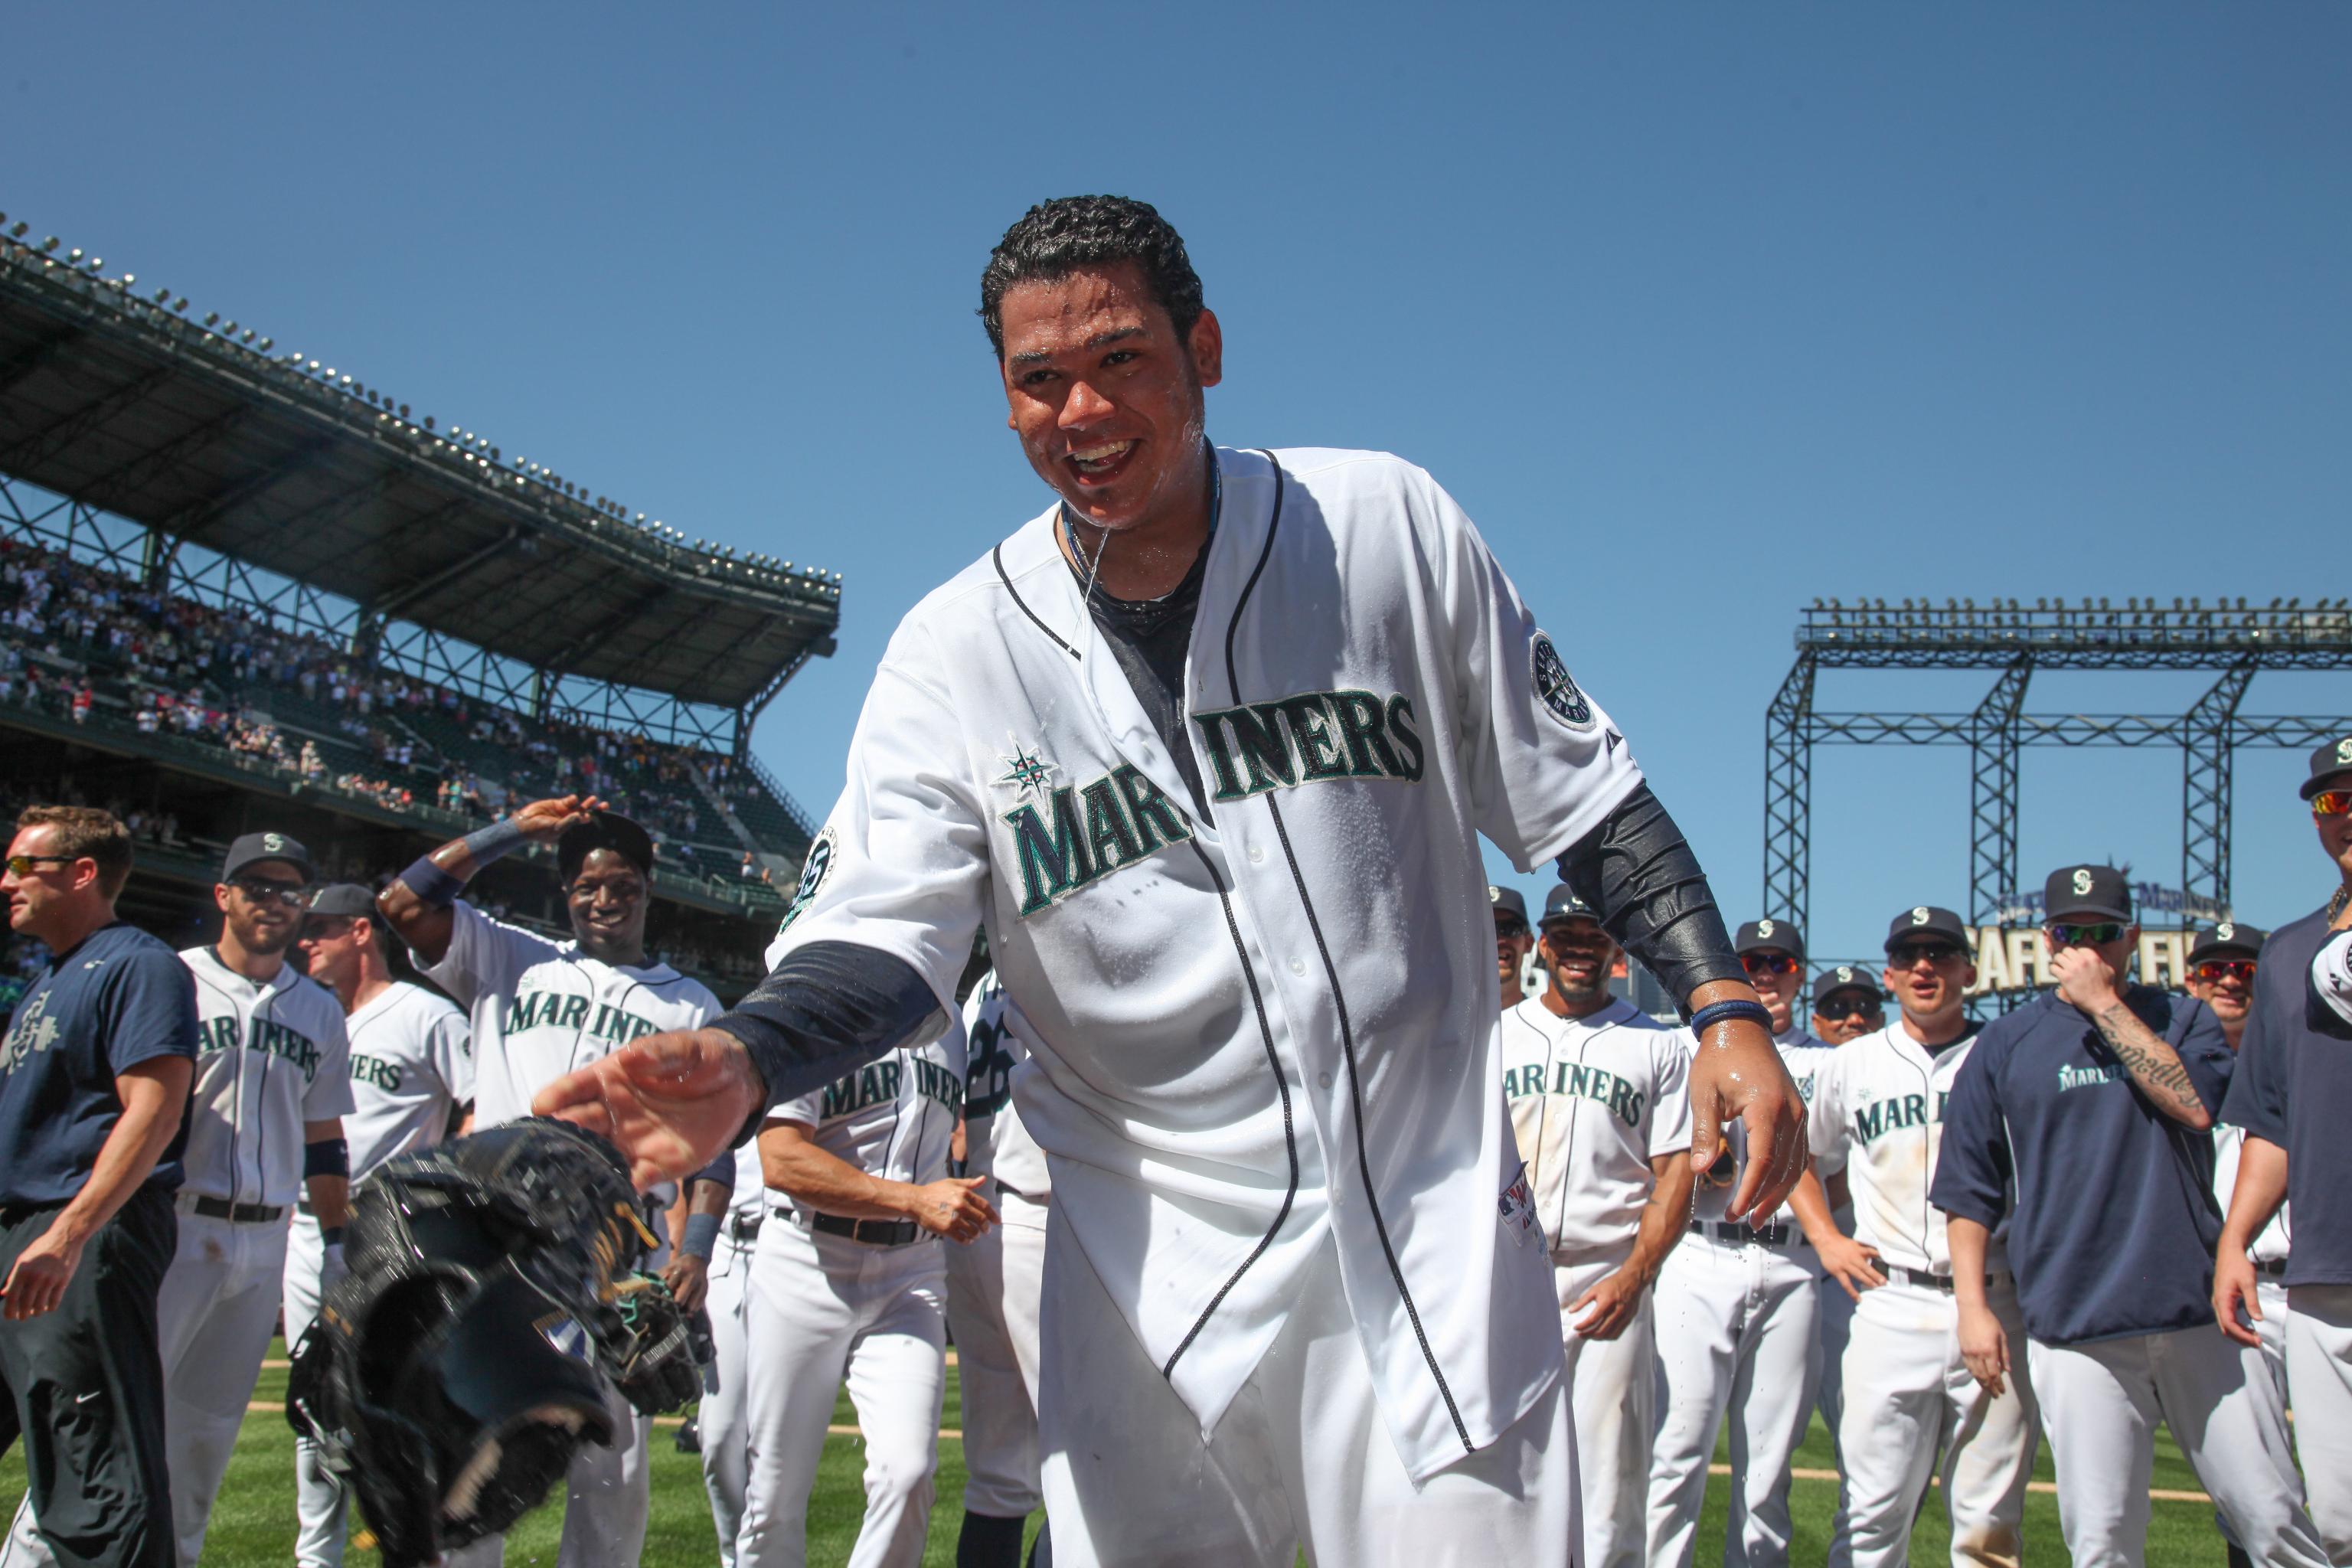 King Felix fires perfect game